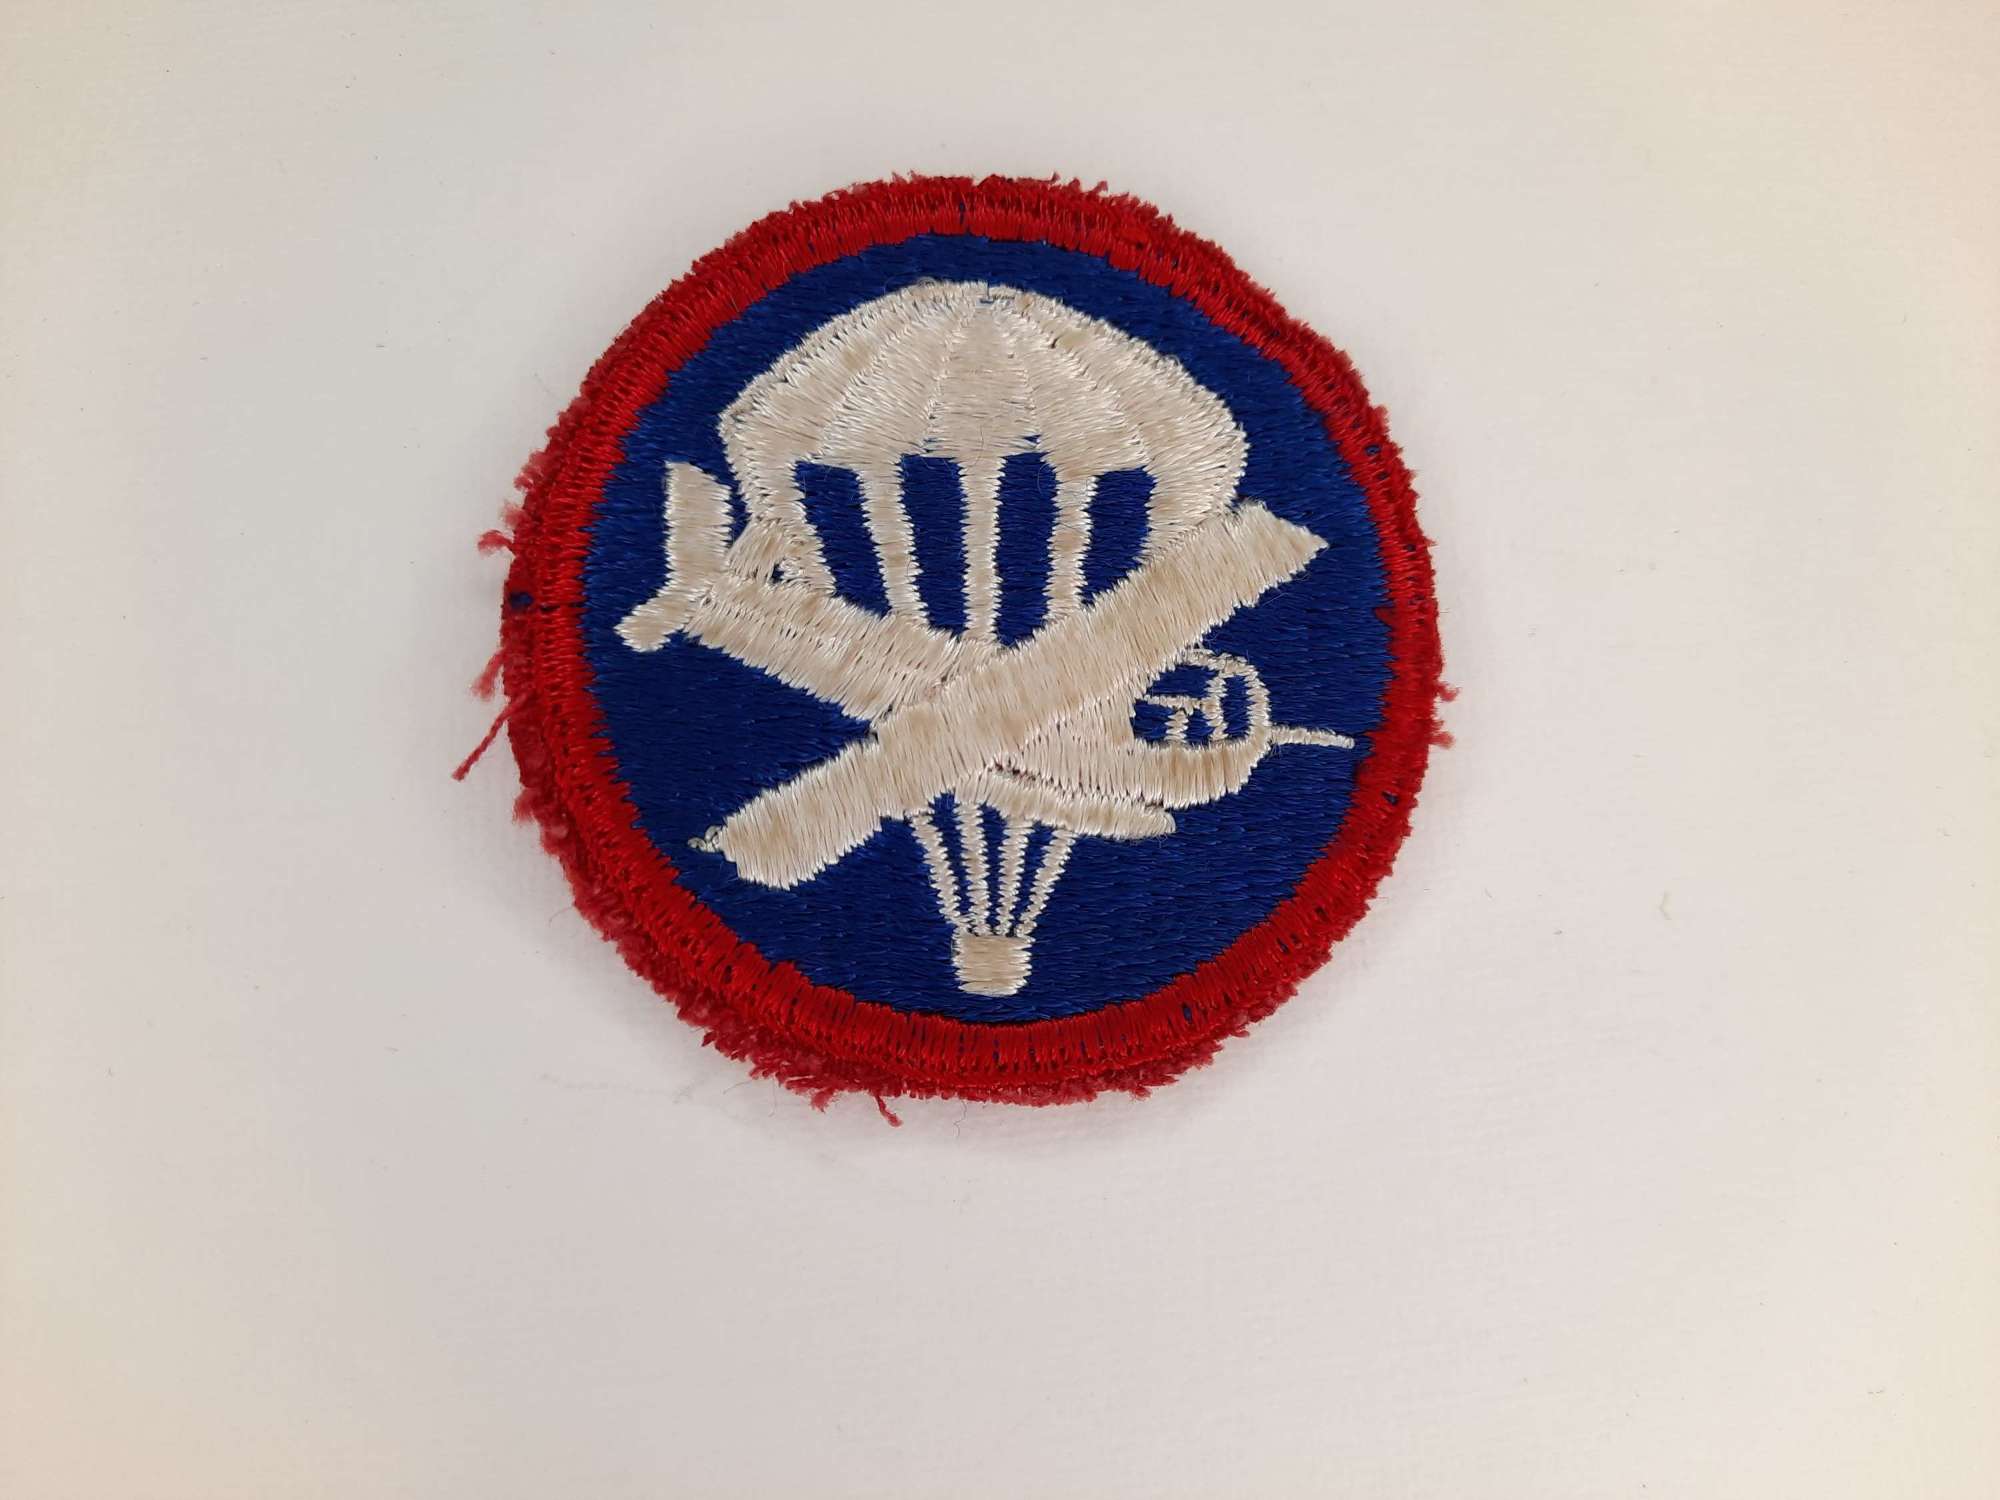 WW2 US Army Officer's Parachute/Glider Infantry Cap Patch